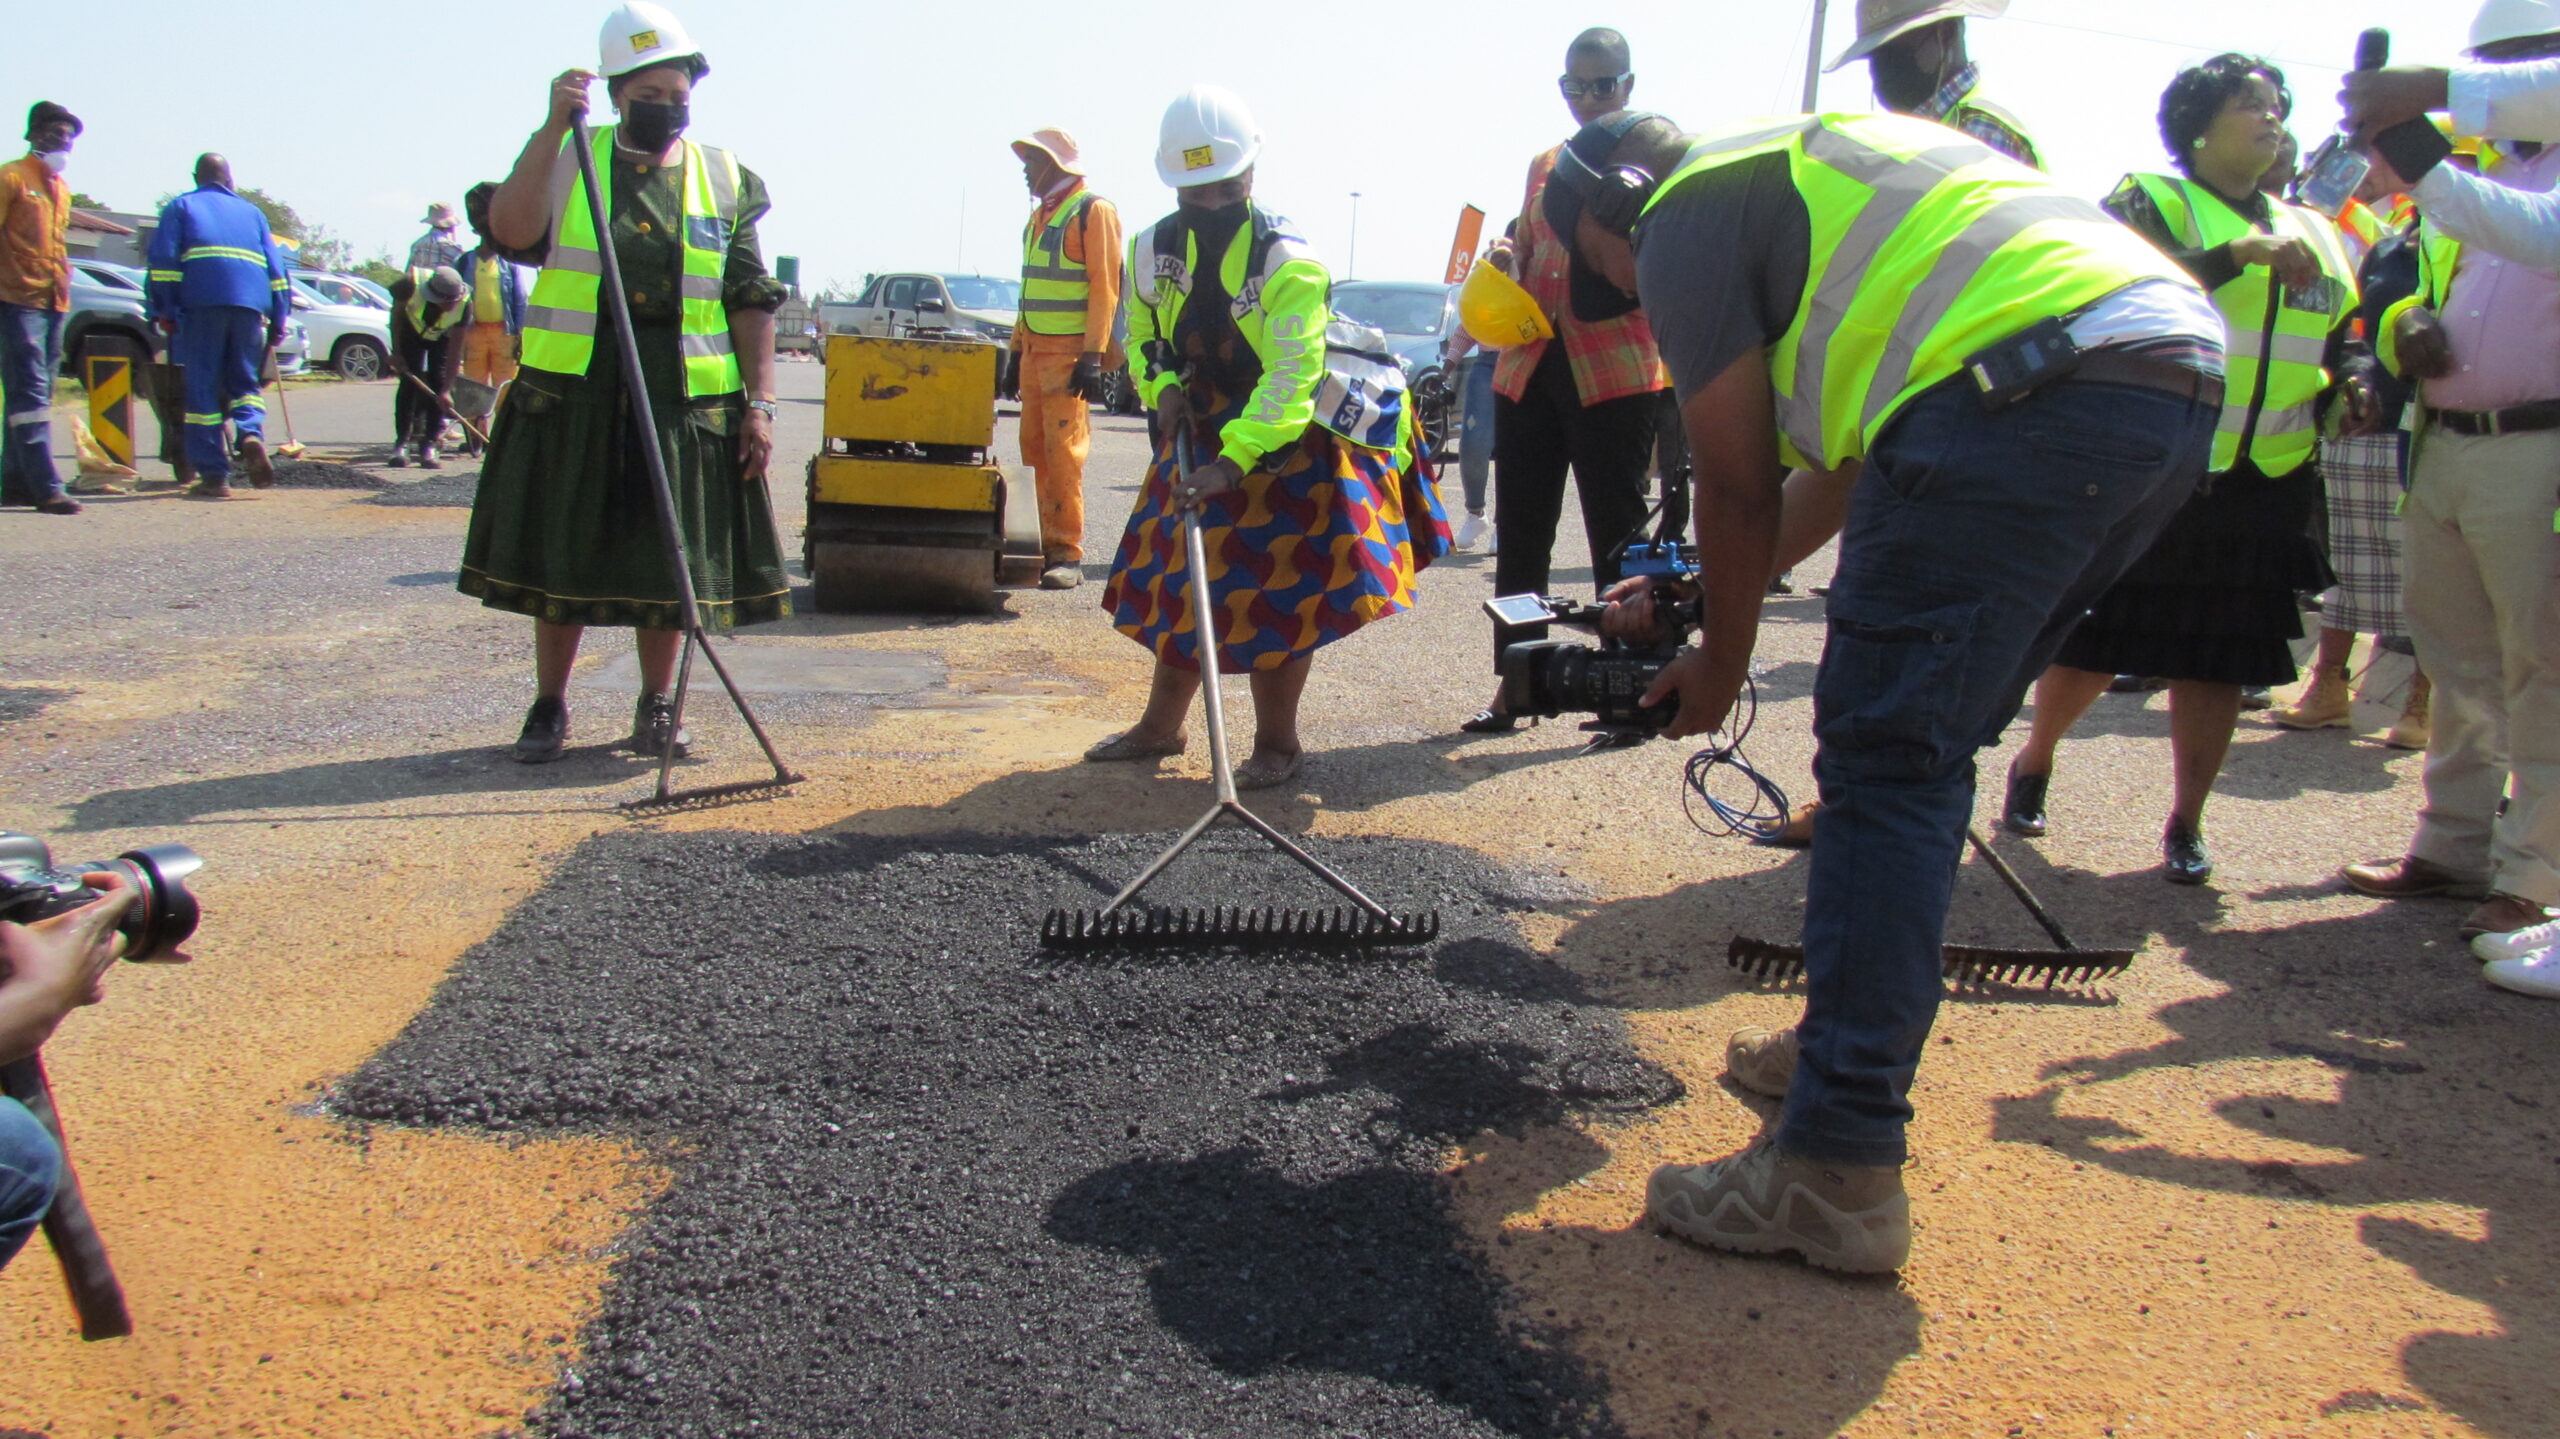 Minister of Transport Sindisiwe Chikunga helped construction workers to patch the road in Moloto photo by Dimakatso Modipa